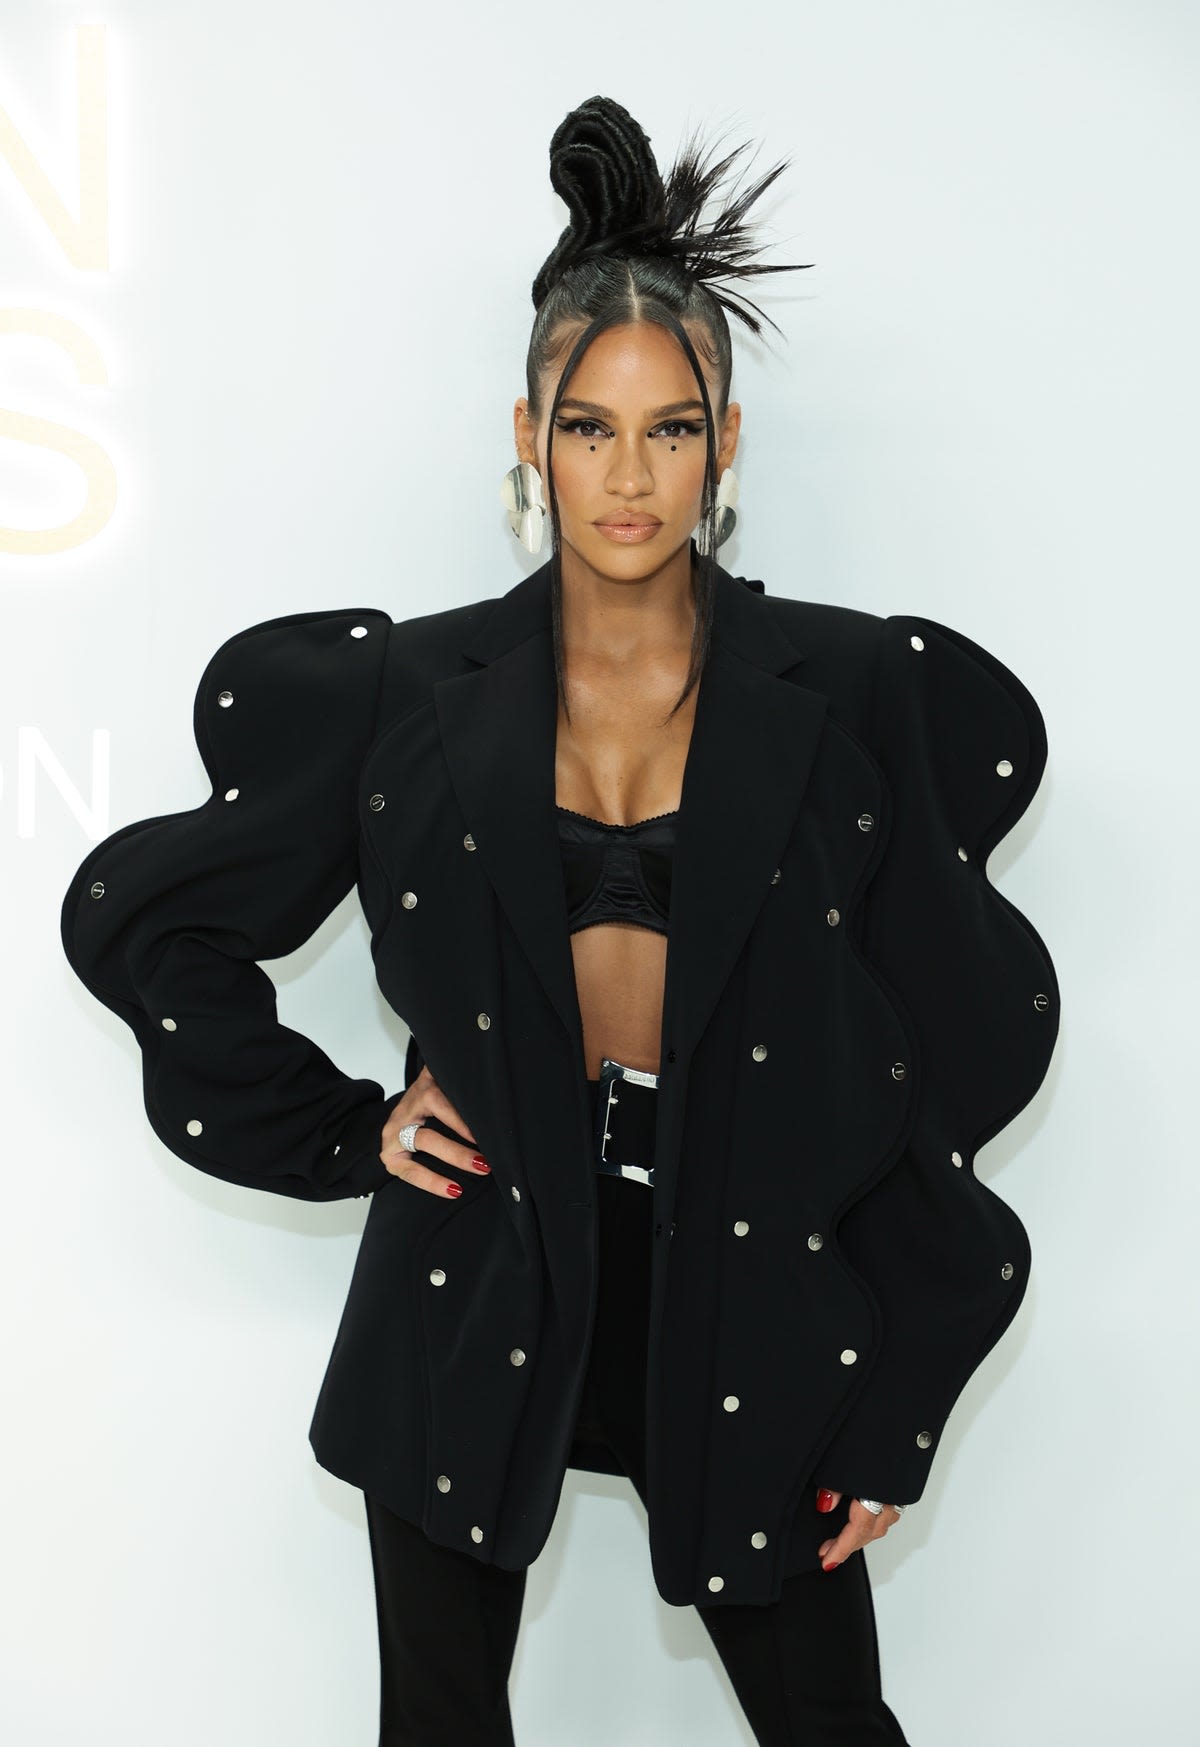 Who is Cassie? Singer says she will 'always be recovering' from her past after Diddy assault video